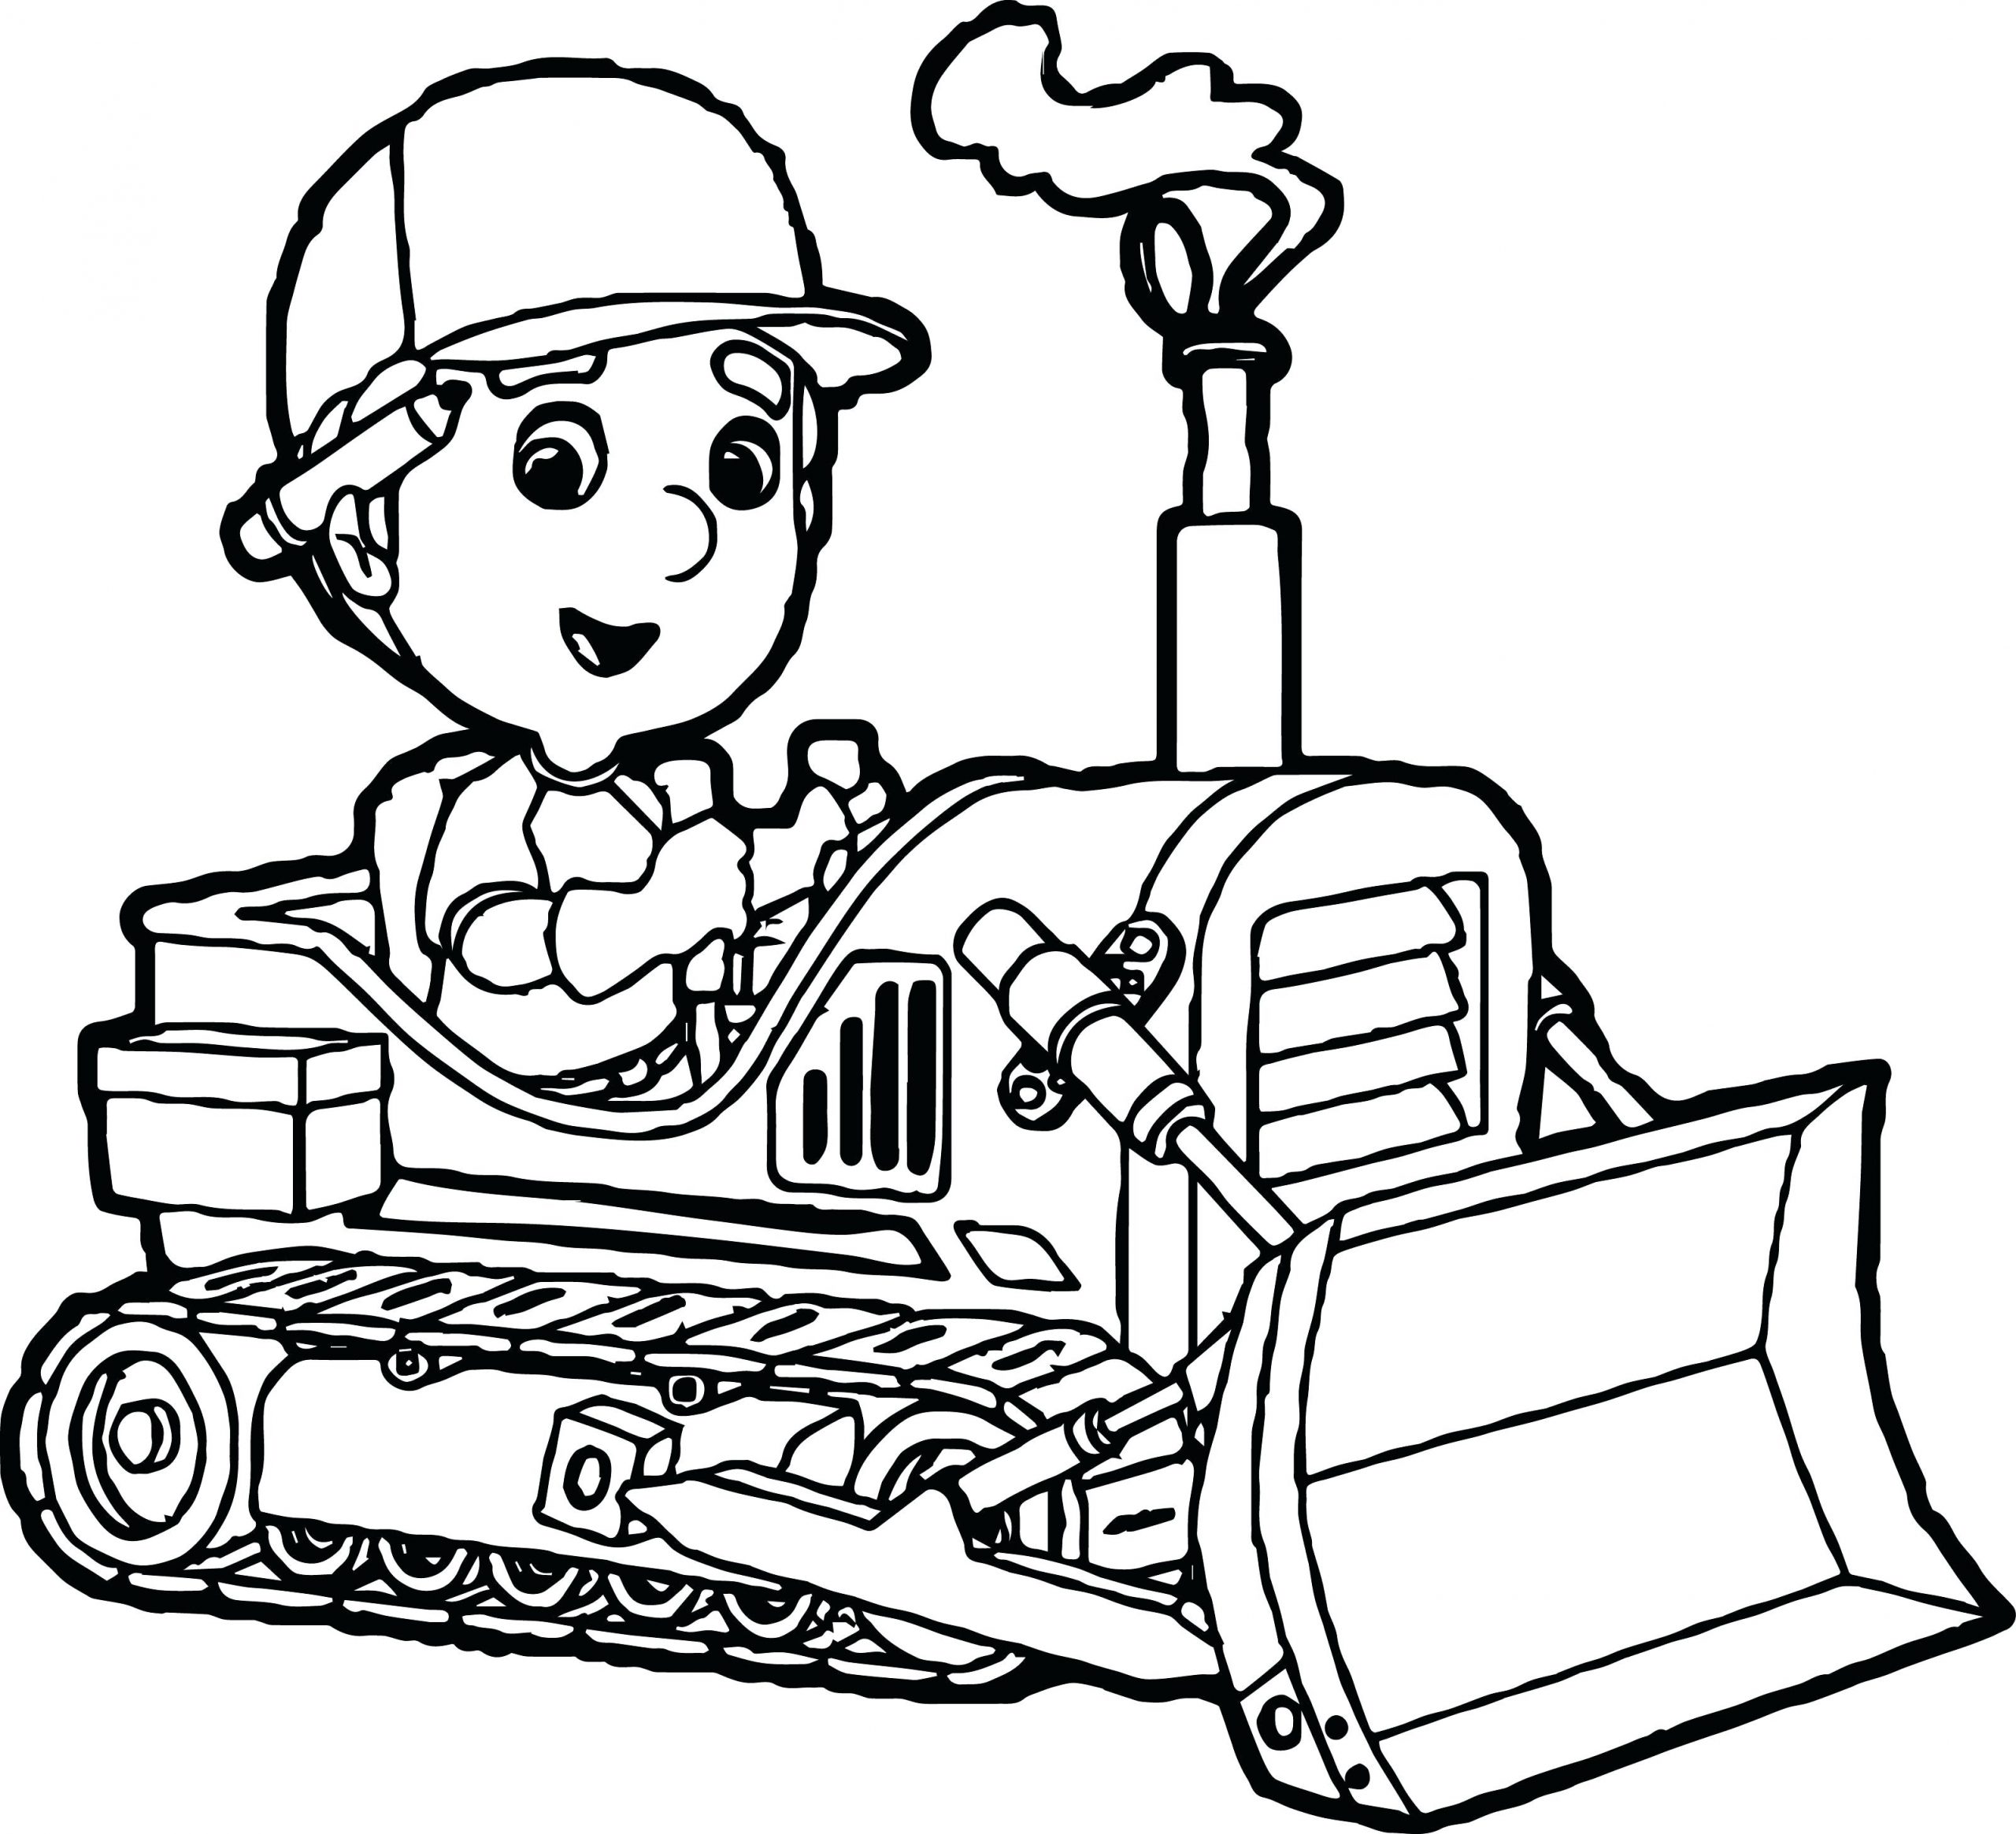 Backhoe Coloring Pages - Coloring Home